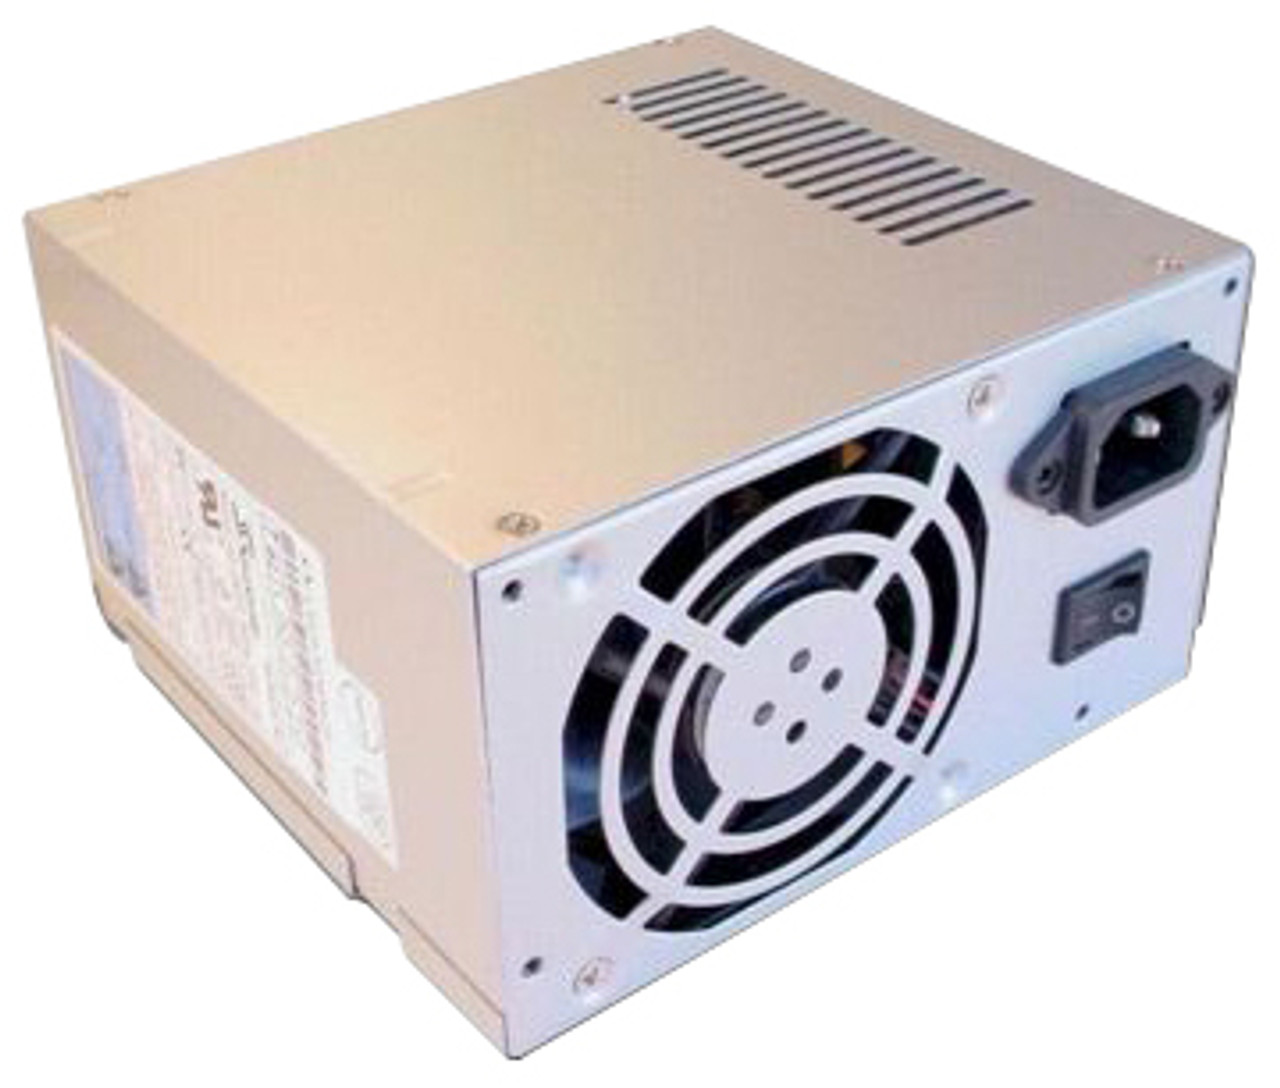 PY.30009.020 Acer 300 Watts PFC Power Supply for Veriton S480g